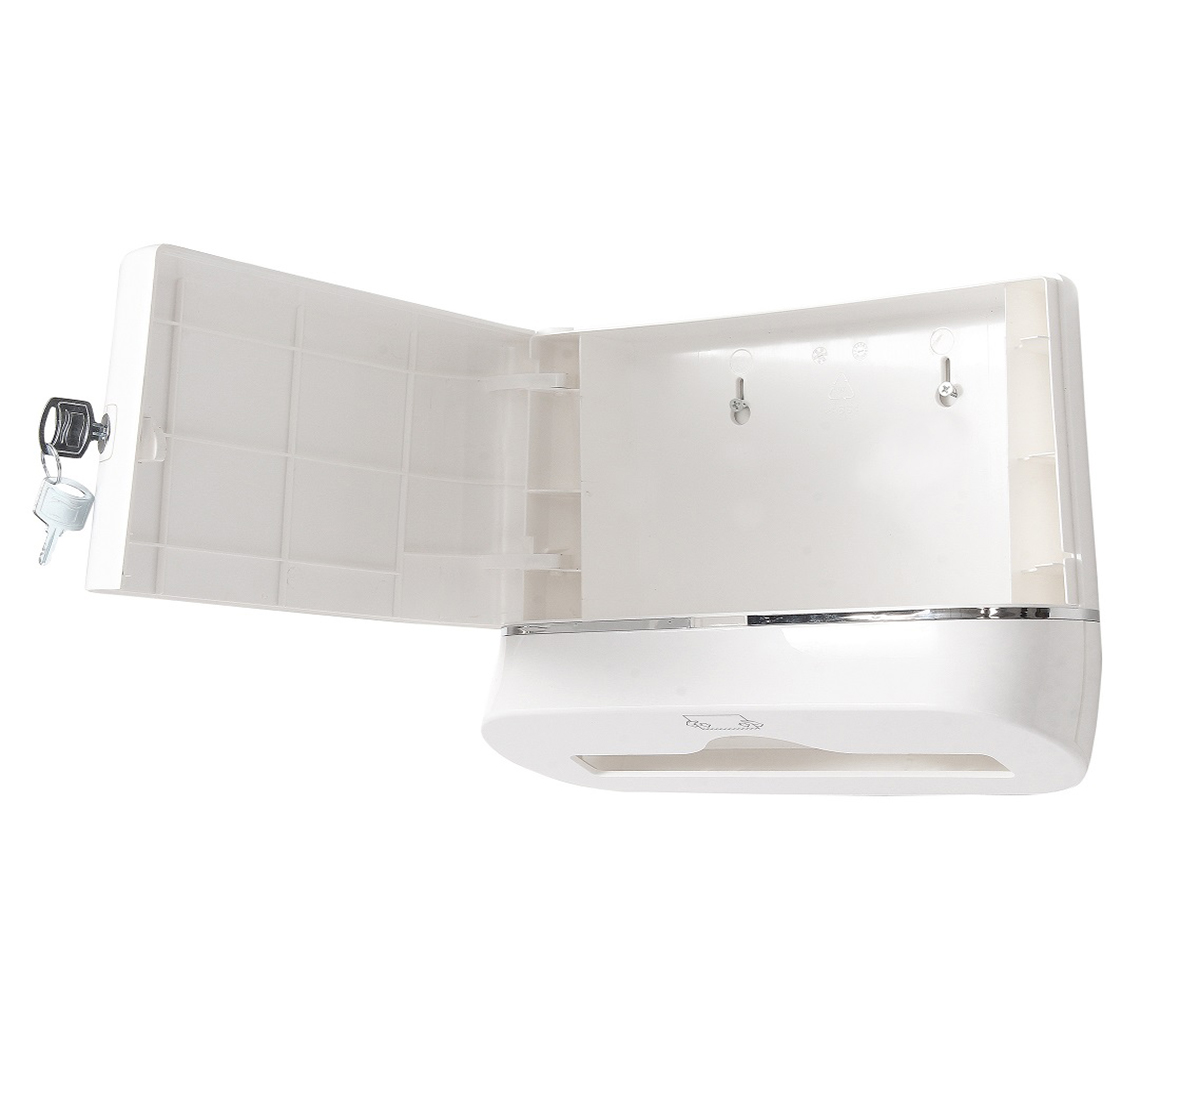 White Manual Paper Dispenser With Material ABS

